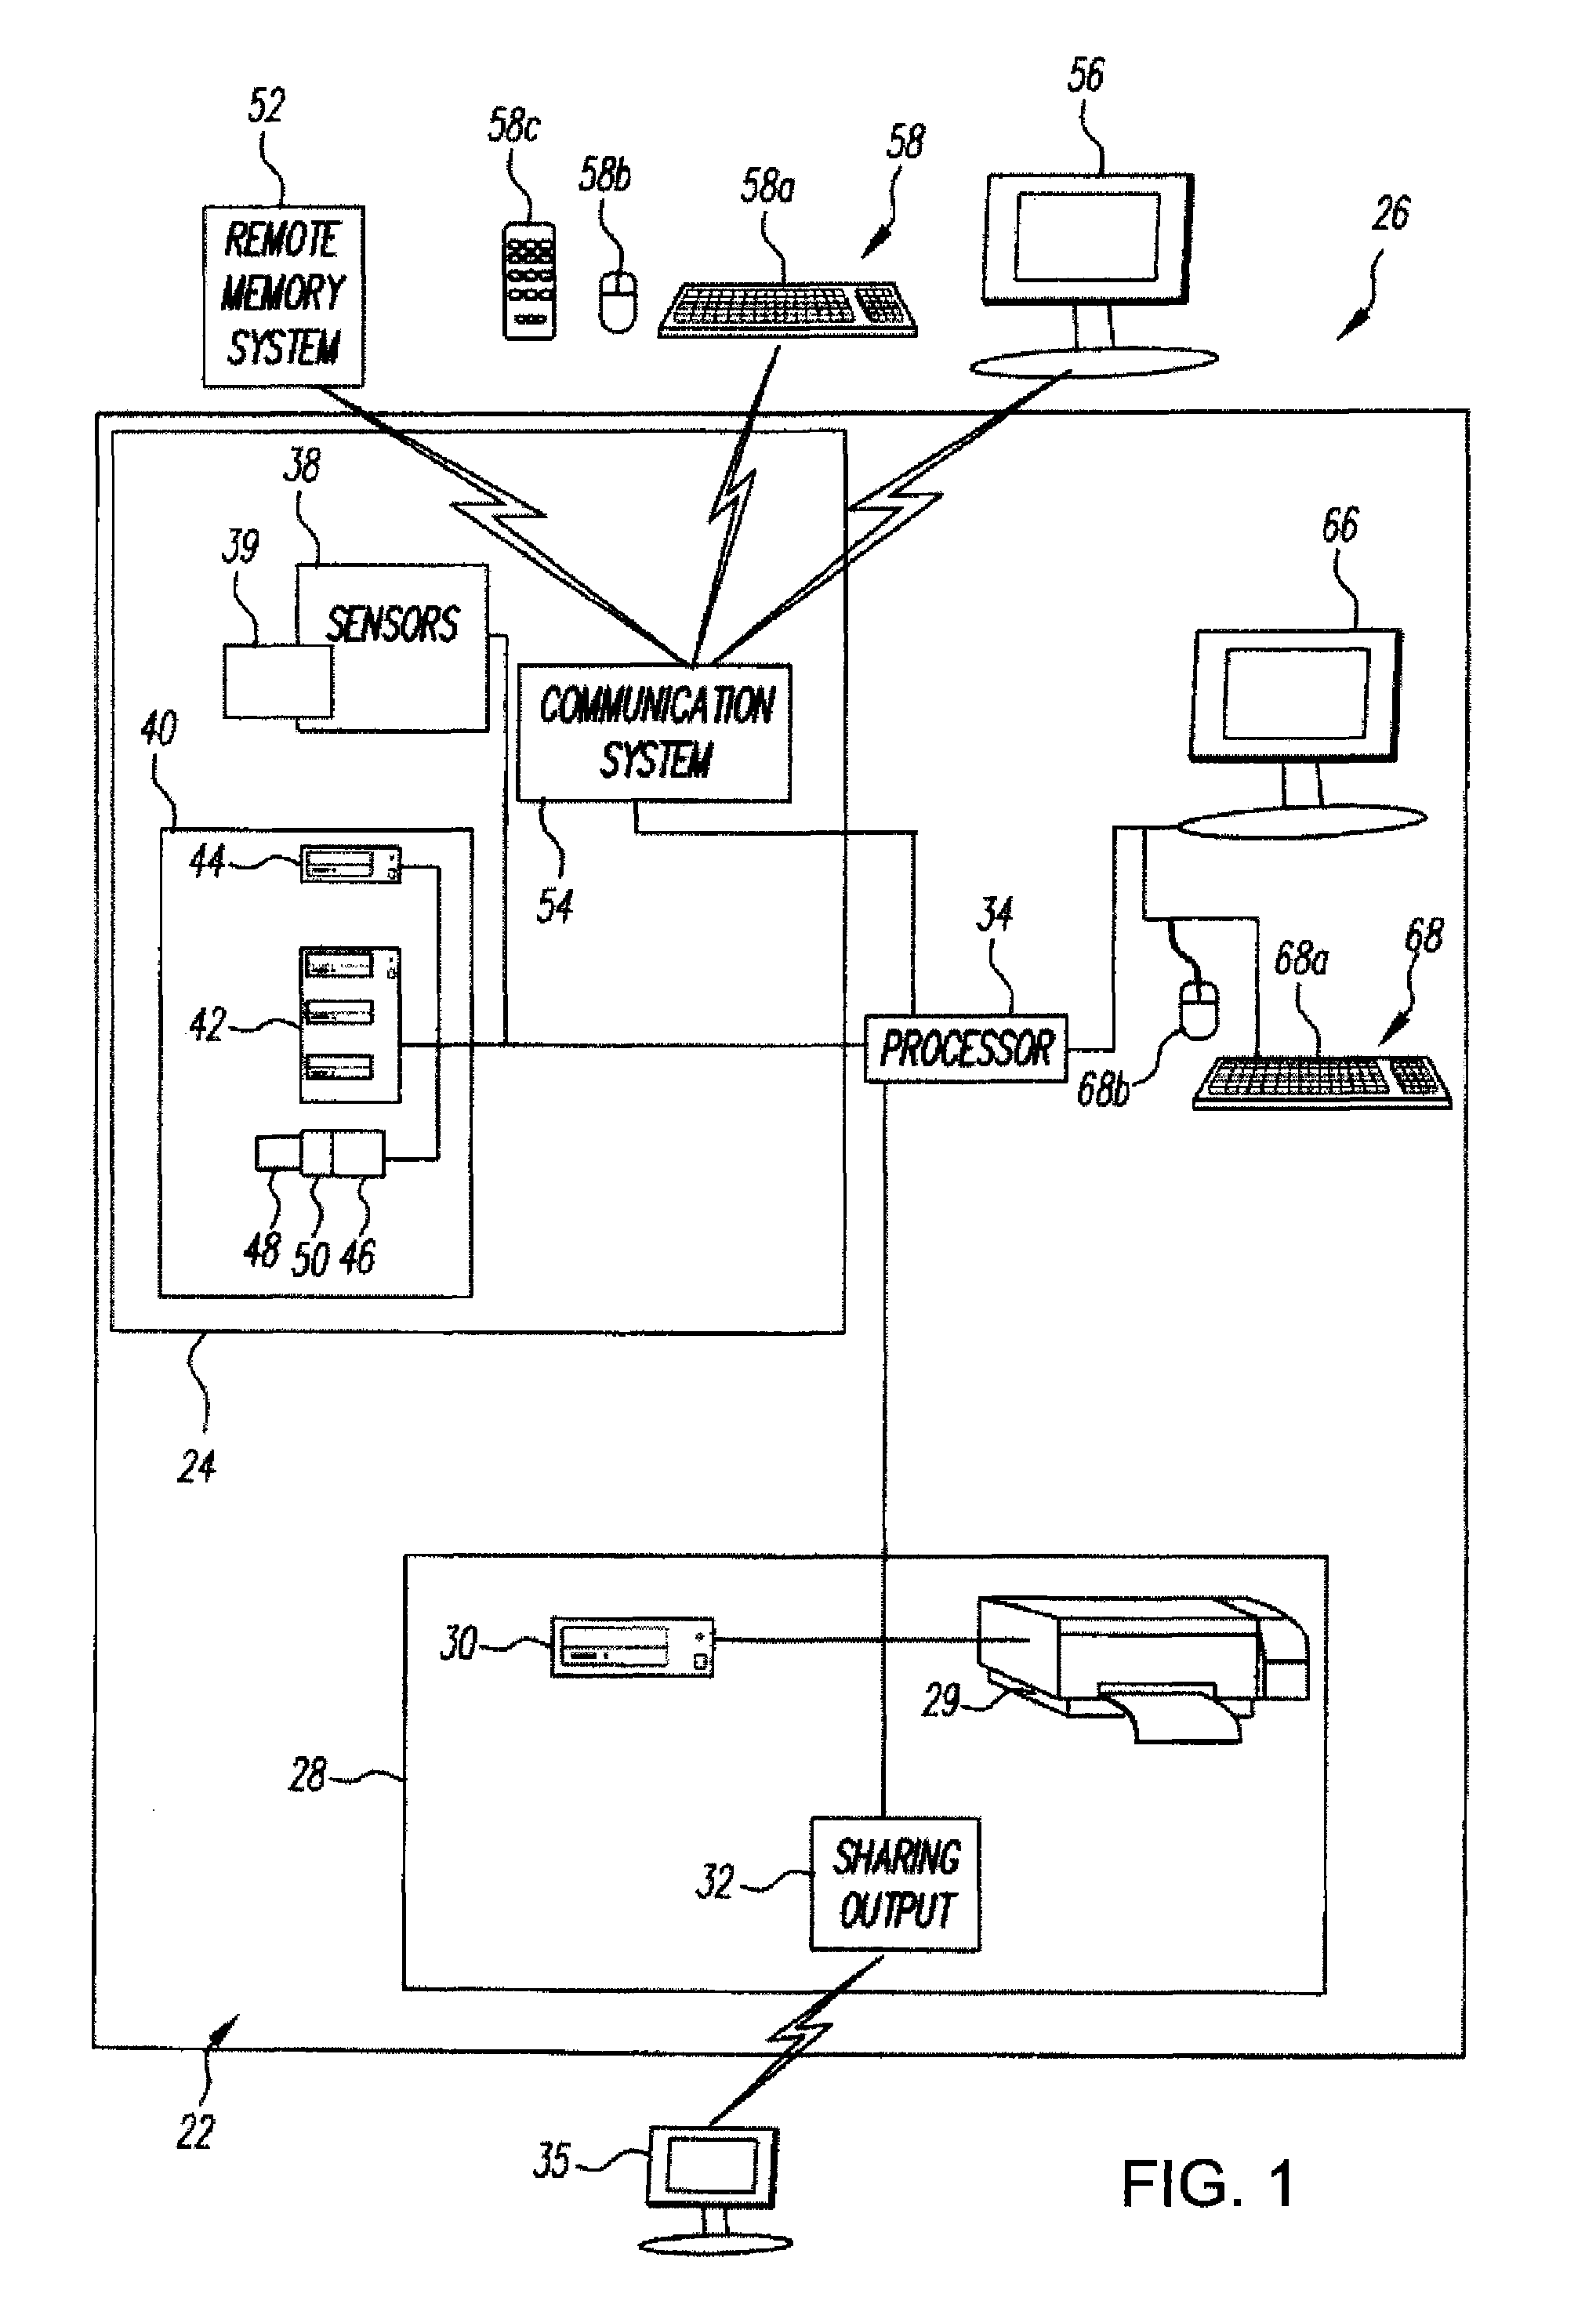 Method of making an artistic digital template for image display